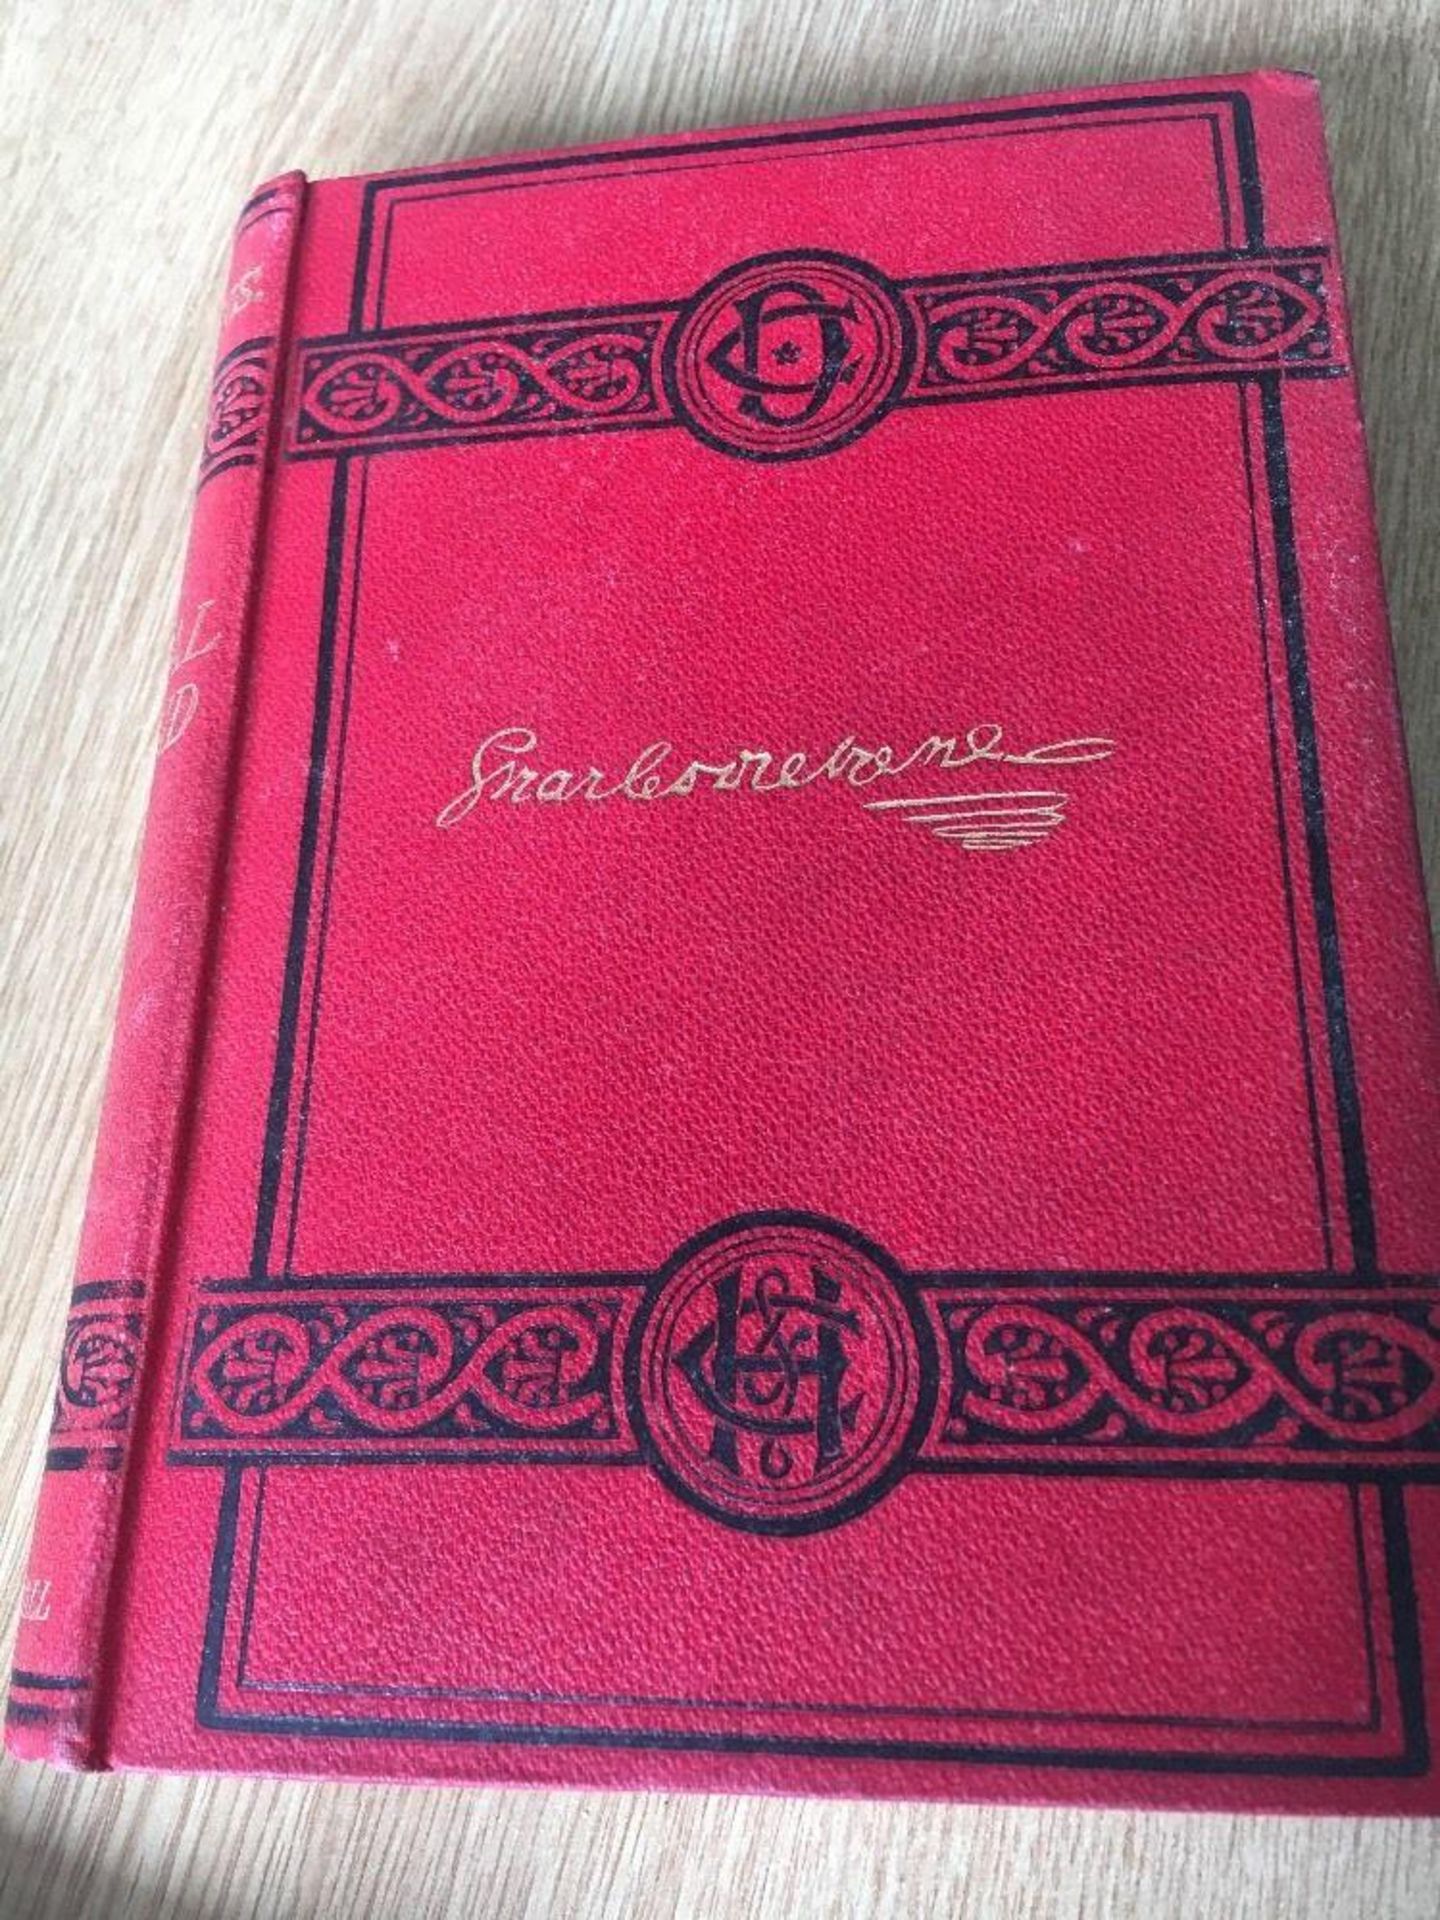 Antique - Charles Dickens - Our Mutual Friend - Chapman & Hall - 1892